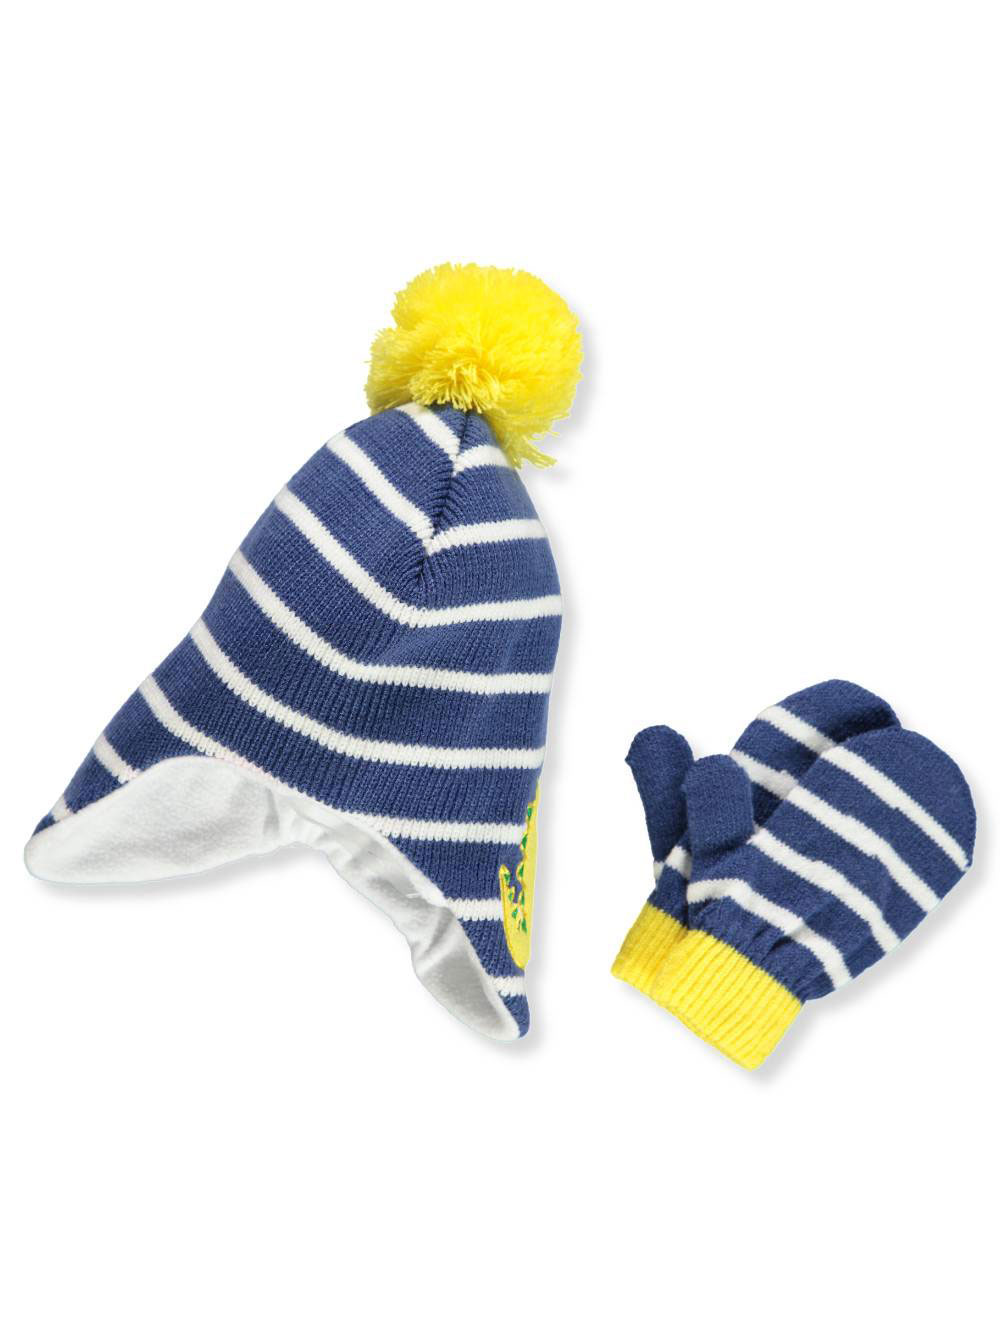 Boys Blue Cold Weather Accessories